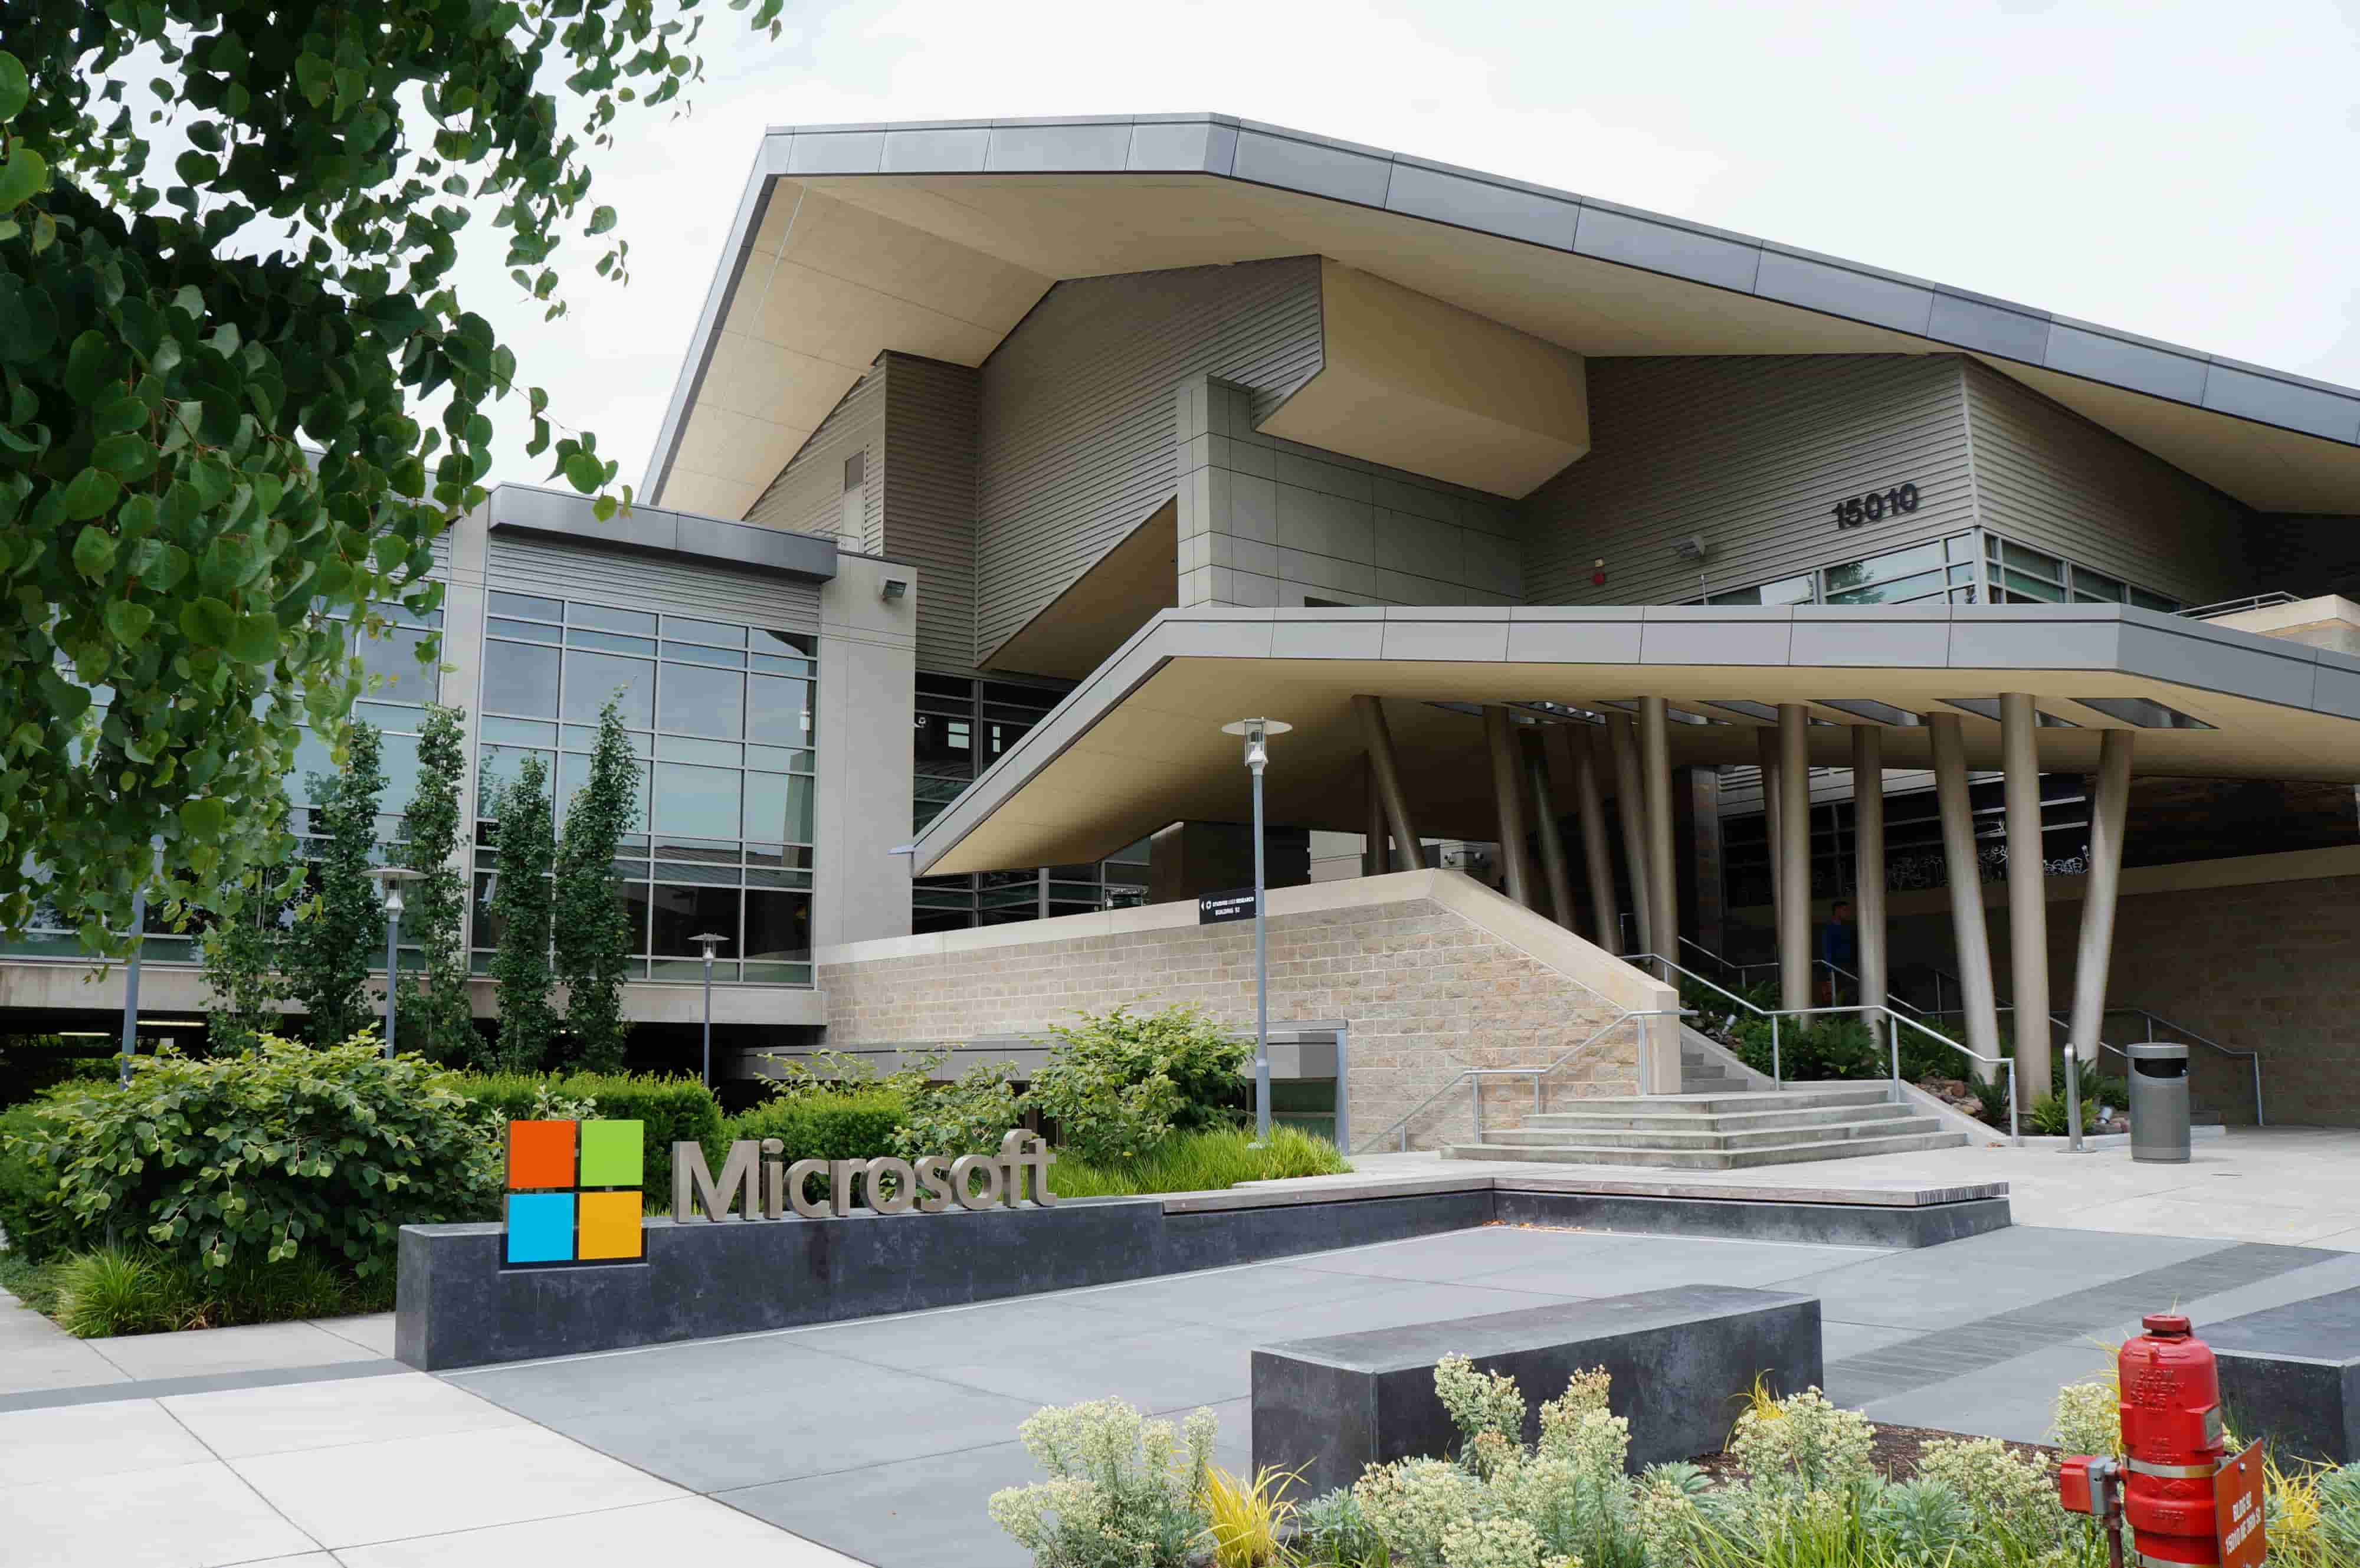 Microsoft to Pay $20M For Illegally Stored Child Data